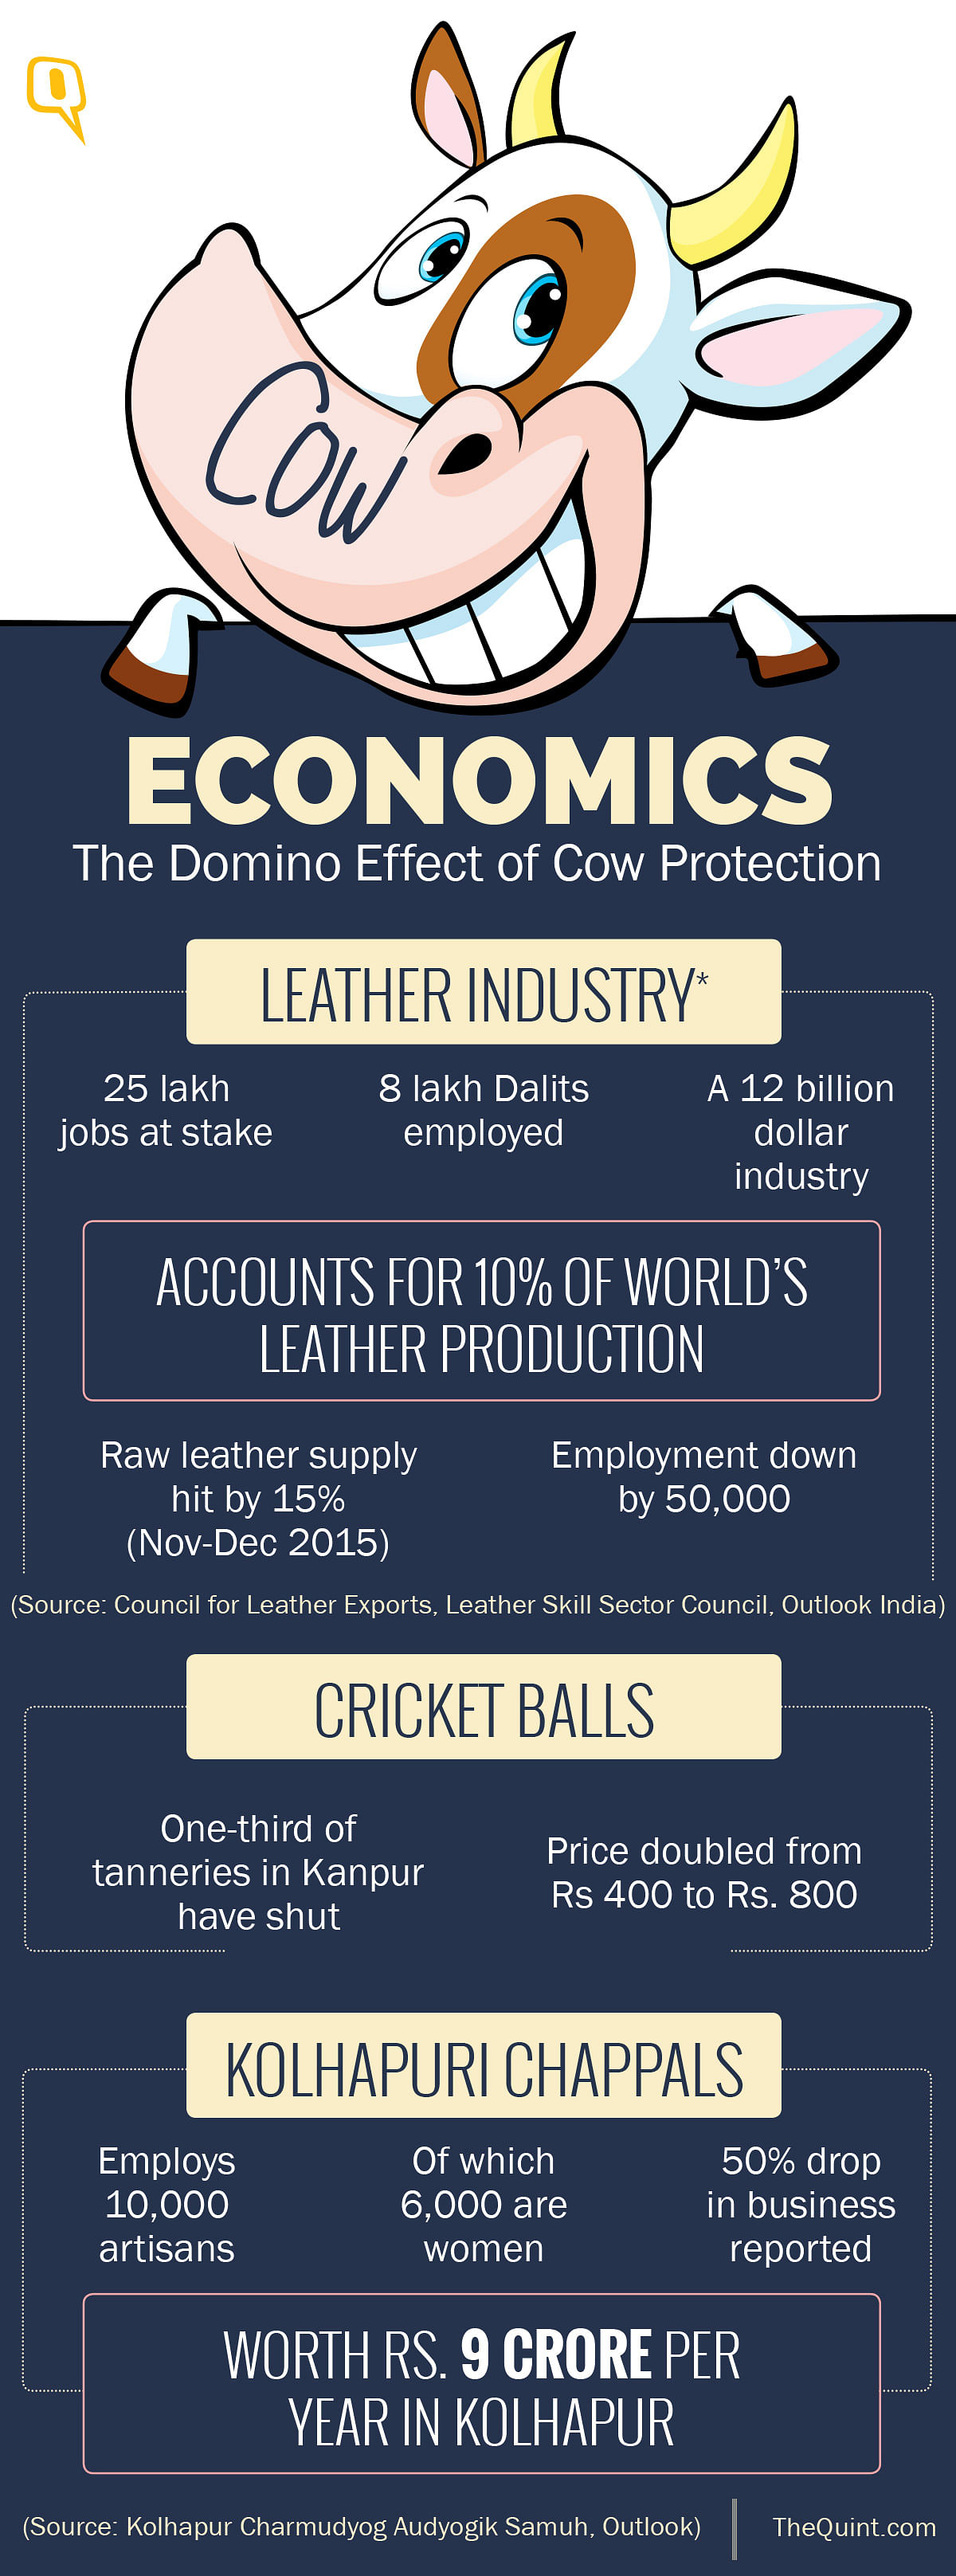 From the leather industry to makers of Kolhapuri chappals, industries which depend on cows are facing a slump.